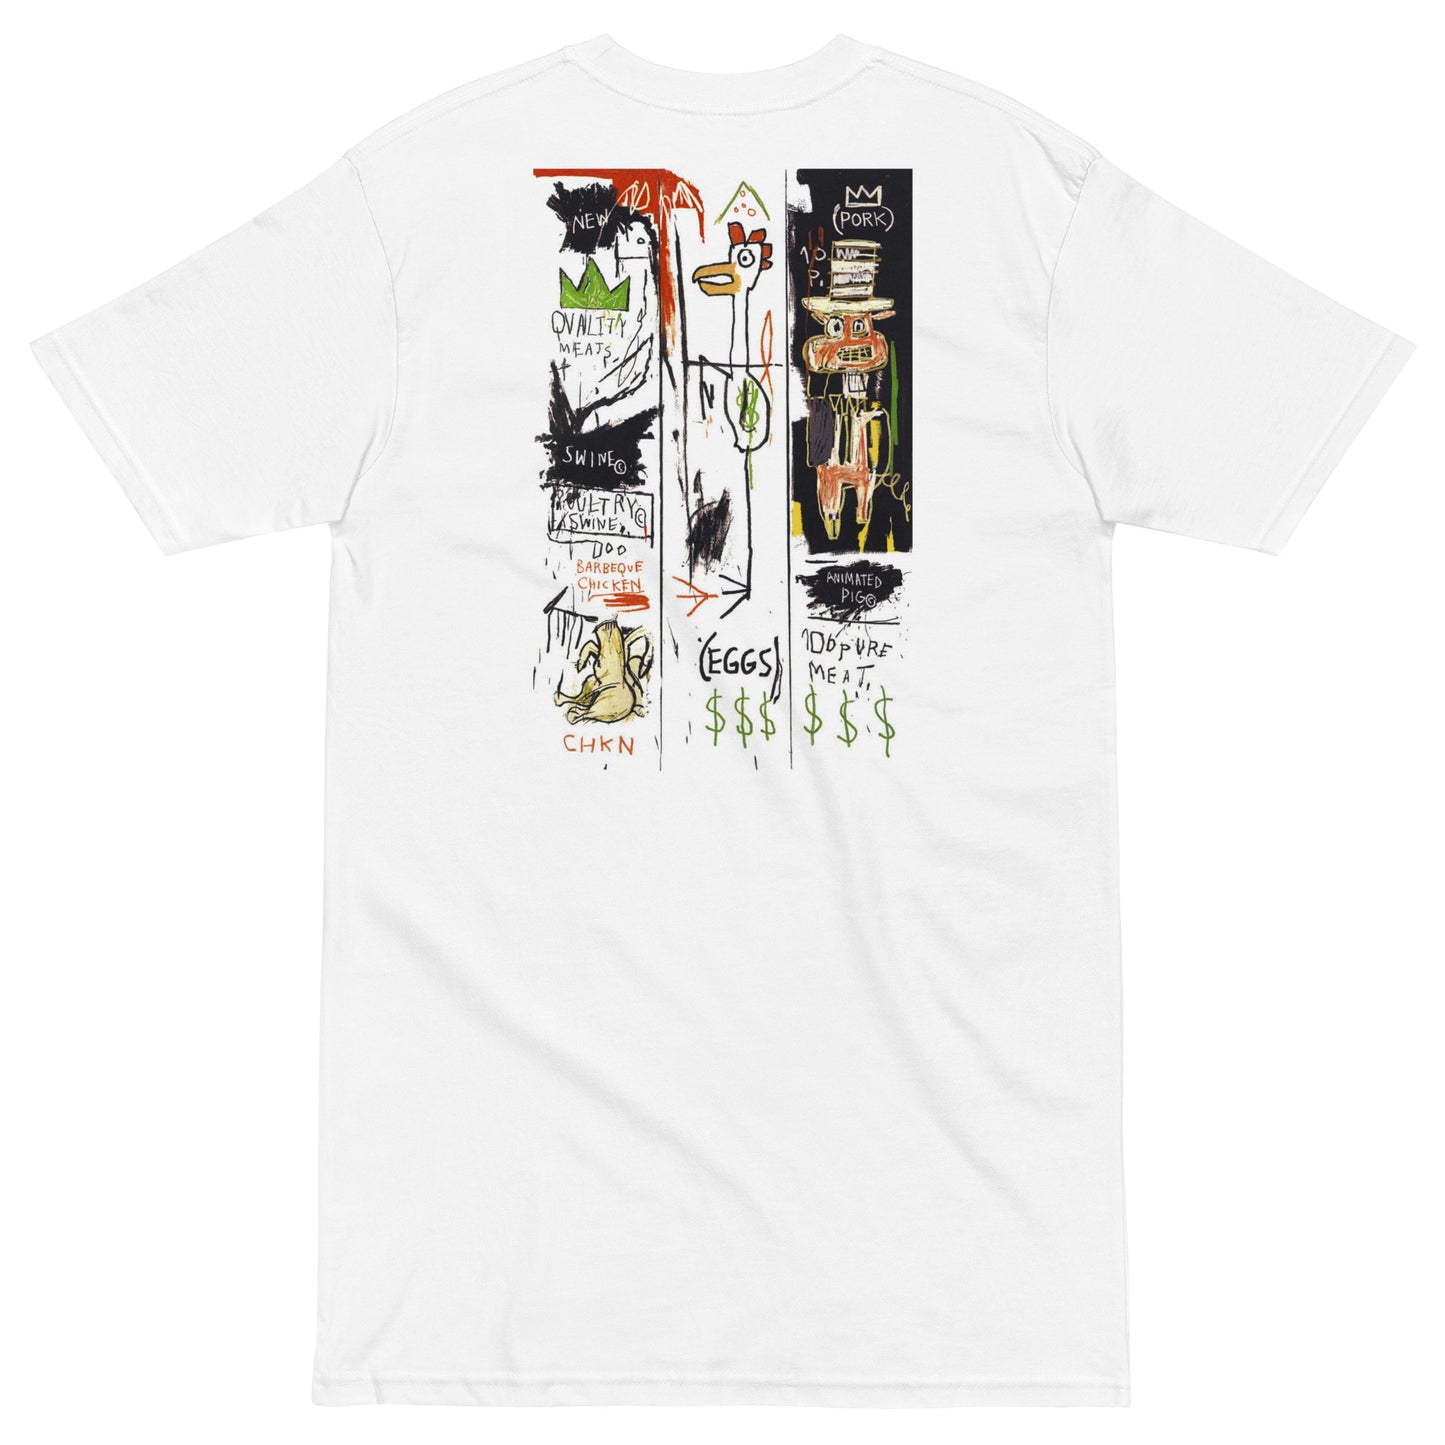 Jean-Michel Basquiat "Quality Meats for the Public" 1982 Artwork Embroidered + Printed Premium Streetwear T-shirt